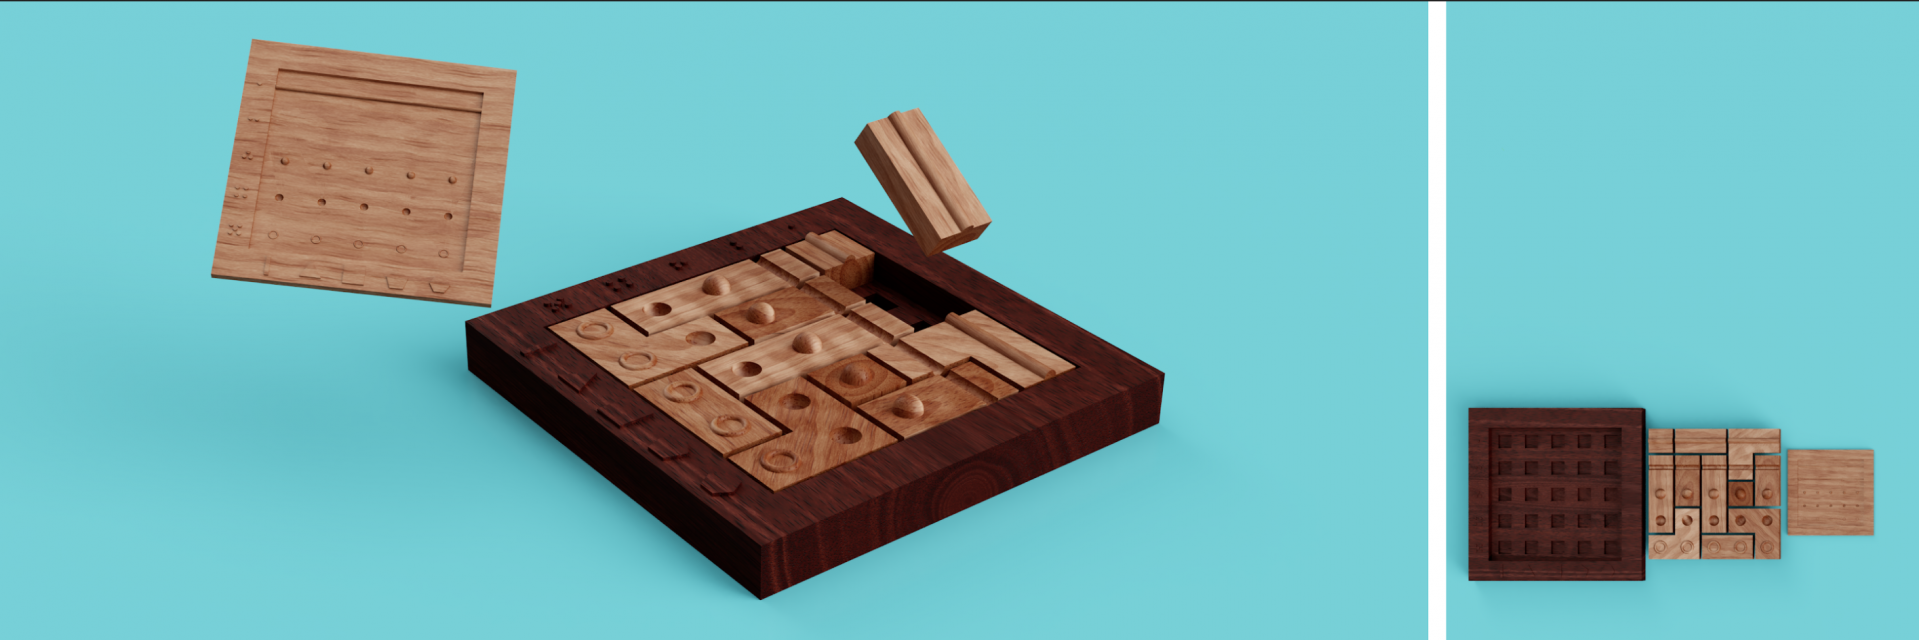 A render of a wooden board toy.